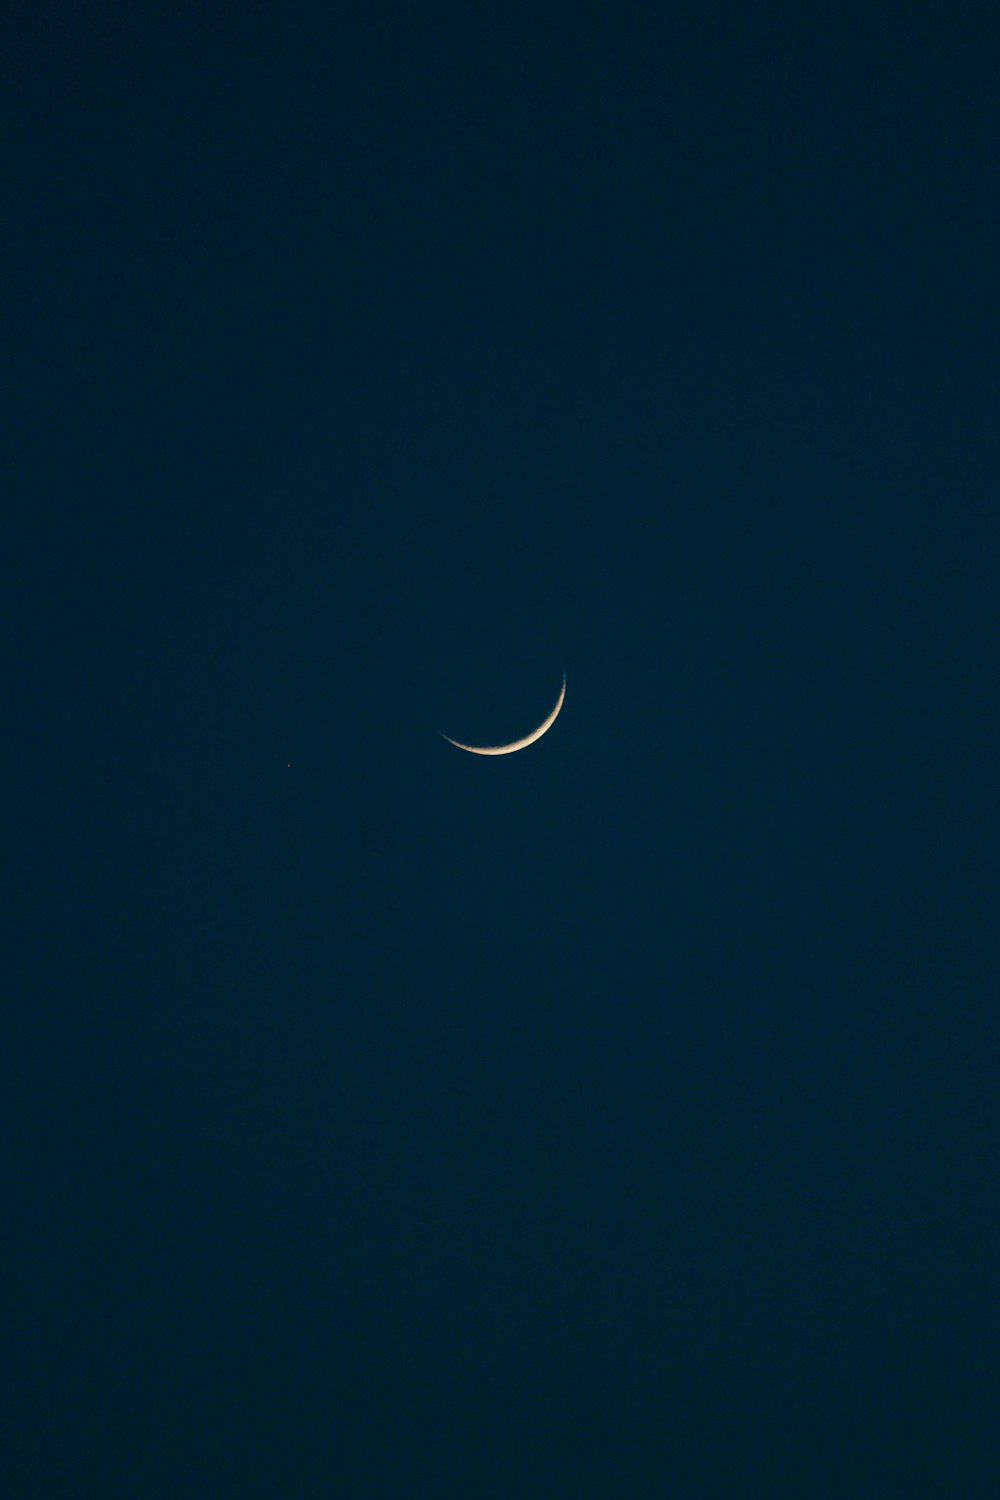 white crescent moon in night sky